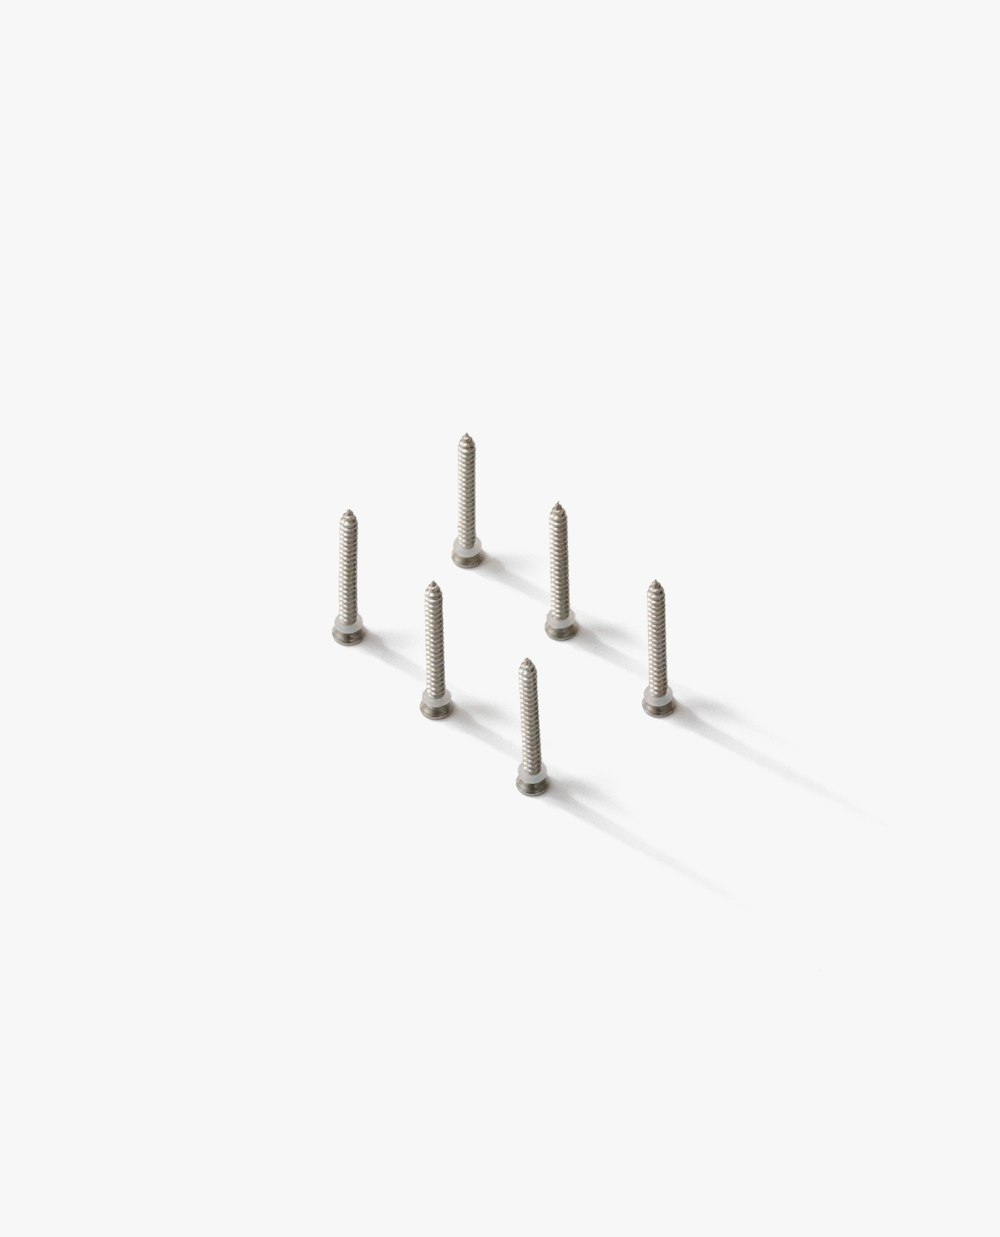 a group of screws sitting on top of a white surface